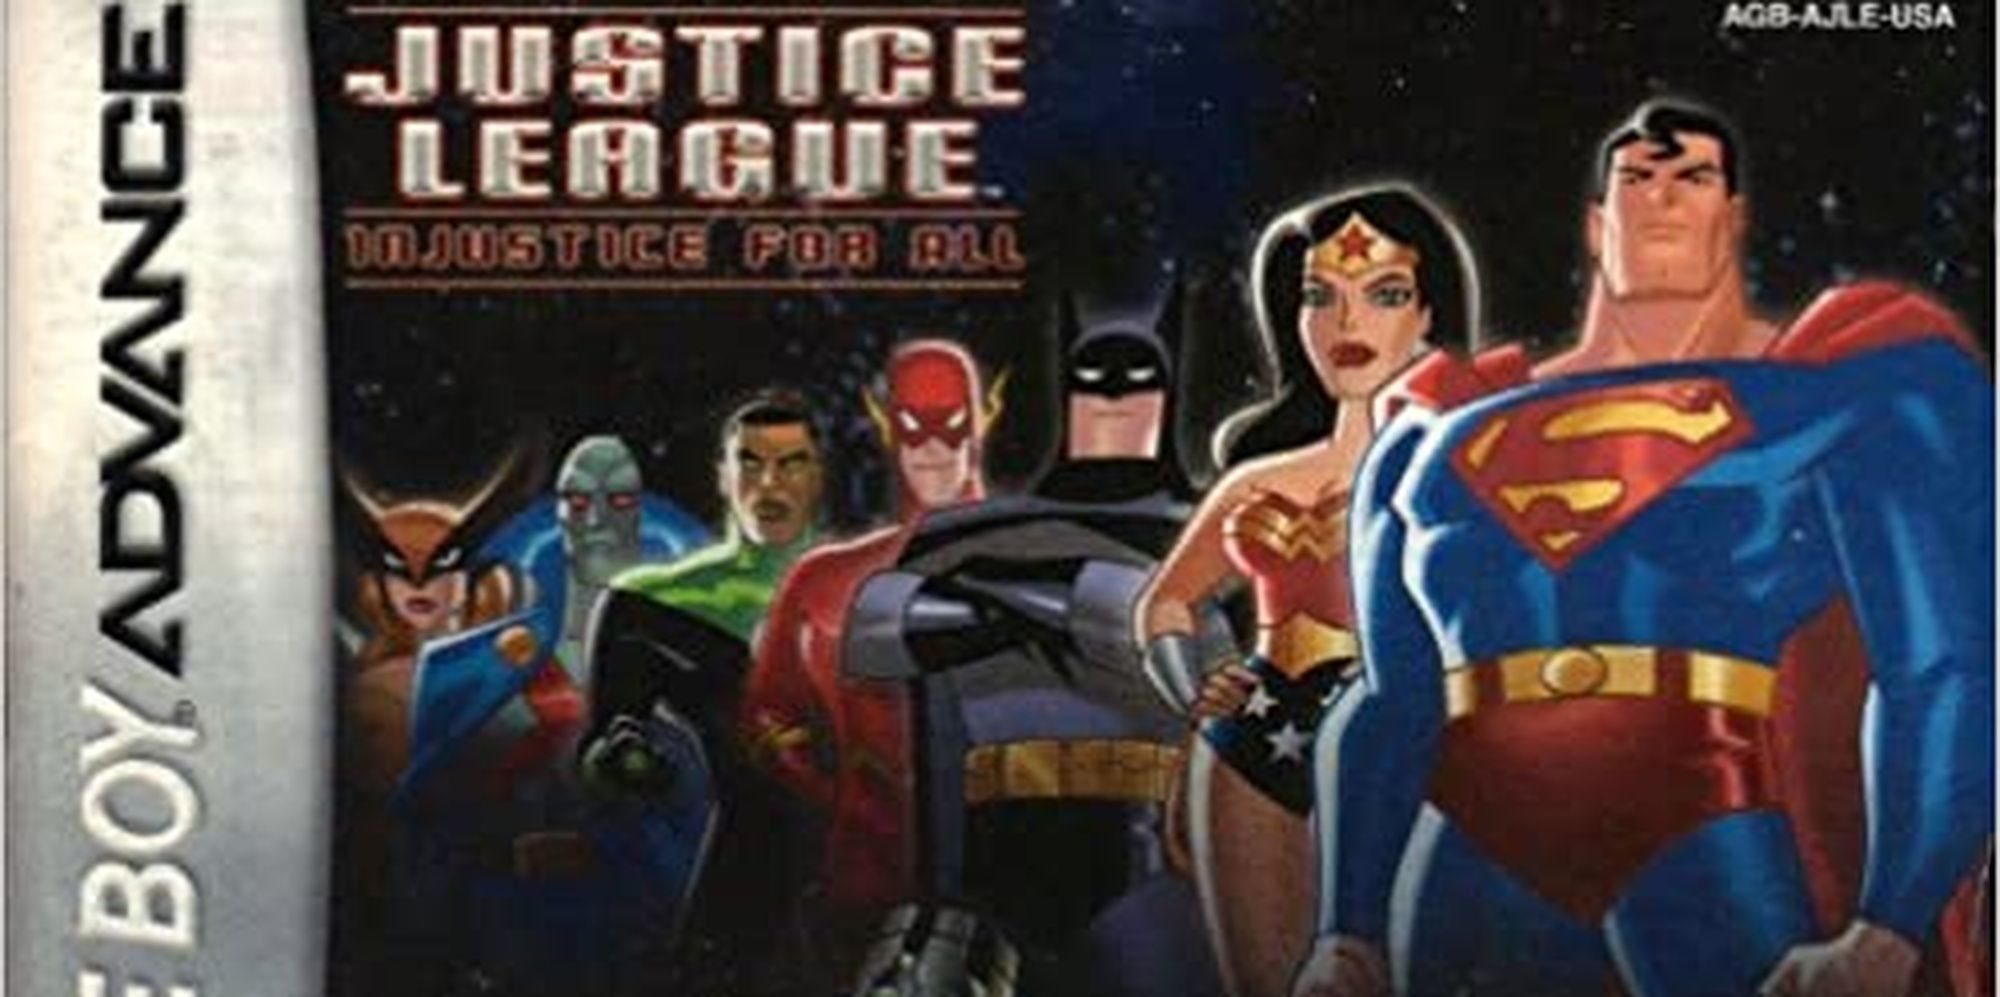 Justice League Injustice For All GBA Game Manual Cropped